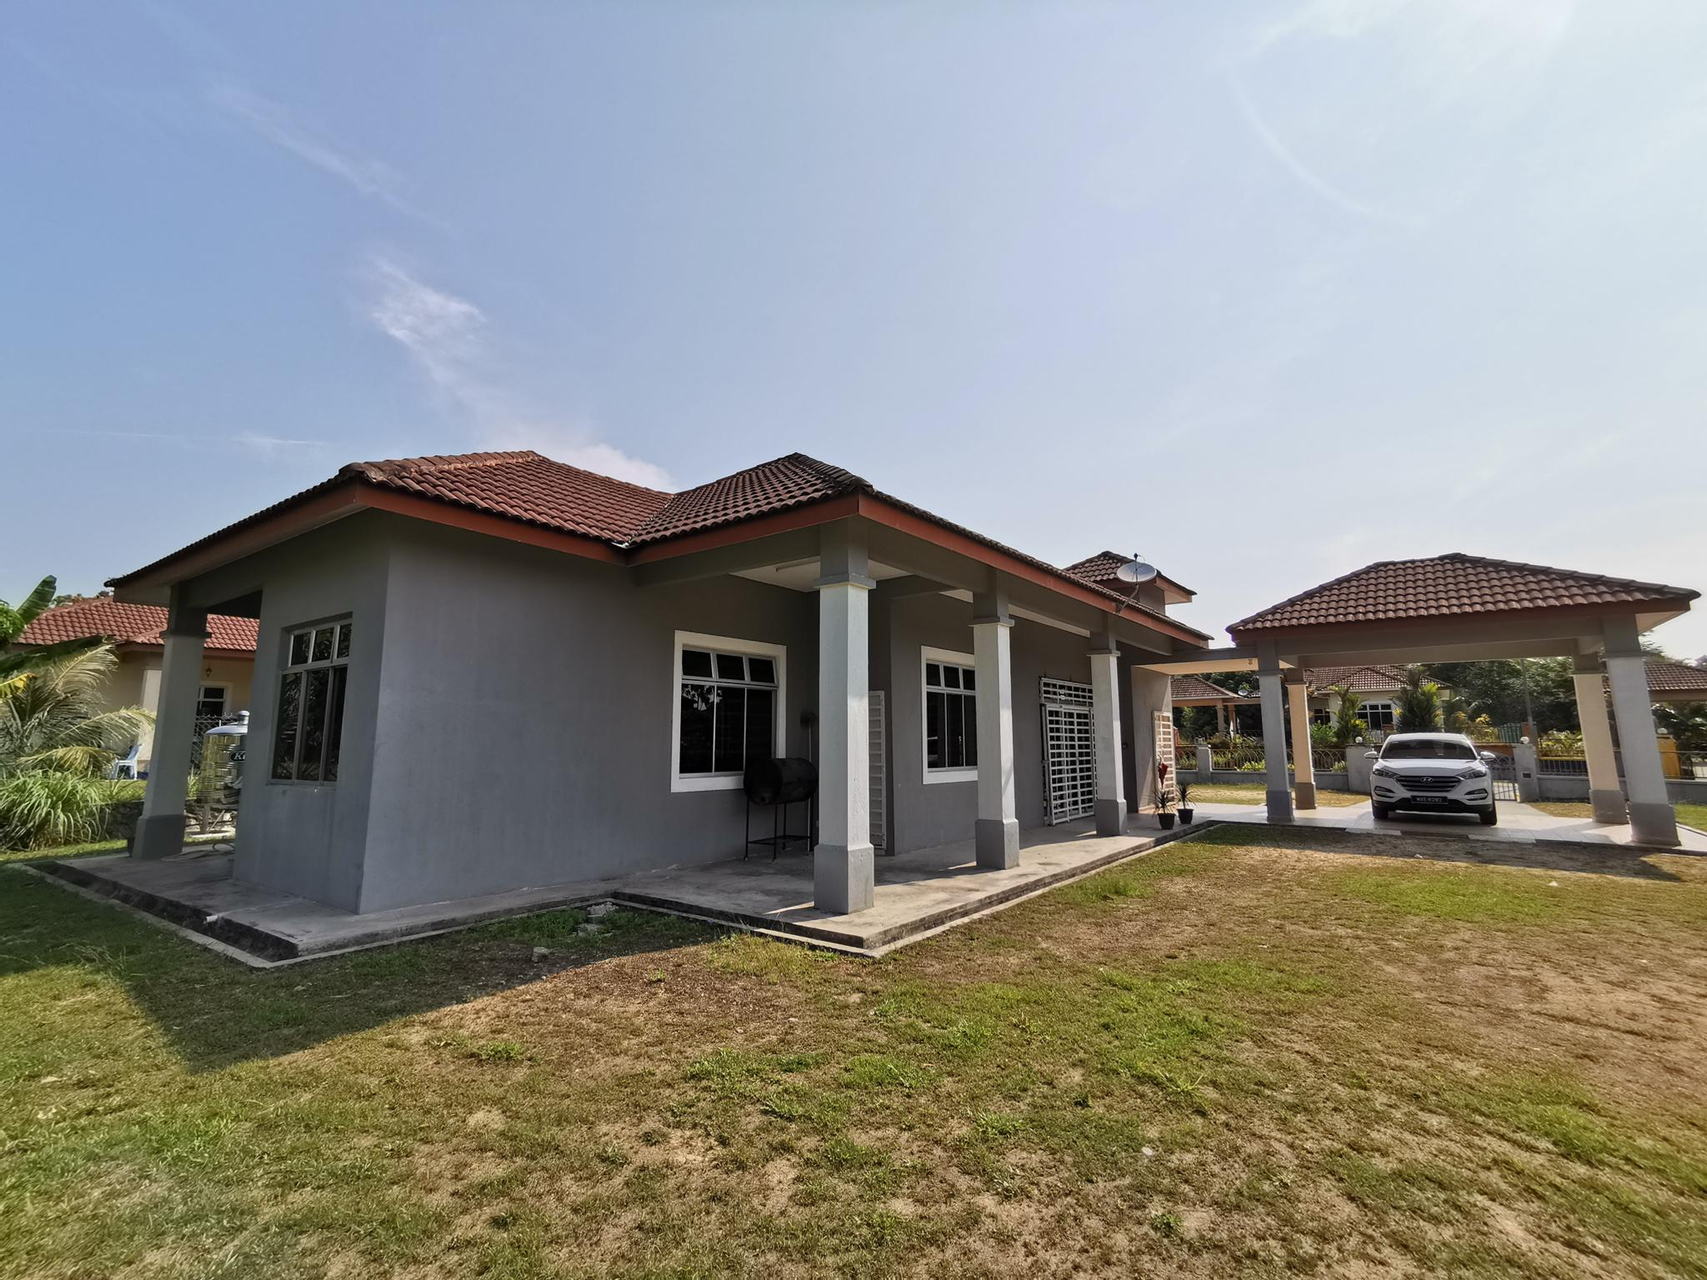 Exterior & Views 2, 22 Residency Homestay / 4BR / Fully Airconditioned, Seremban